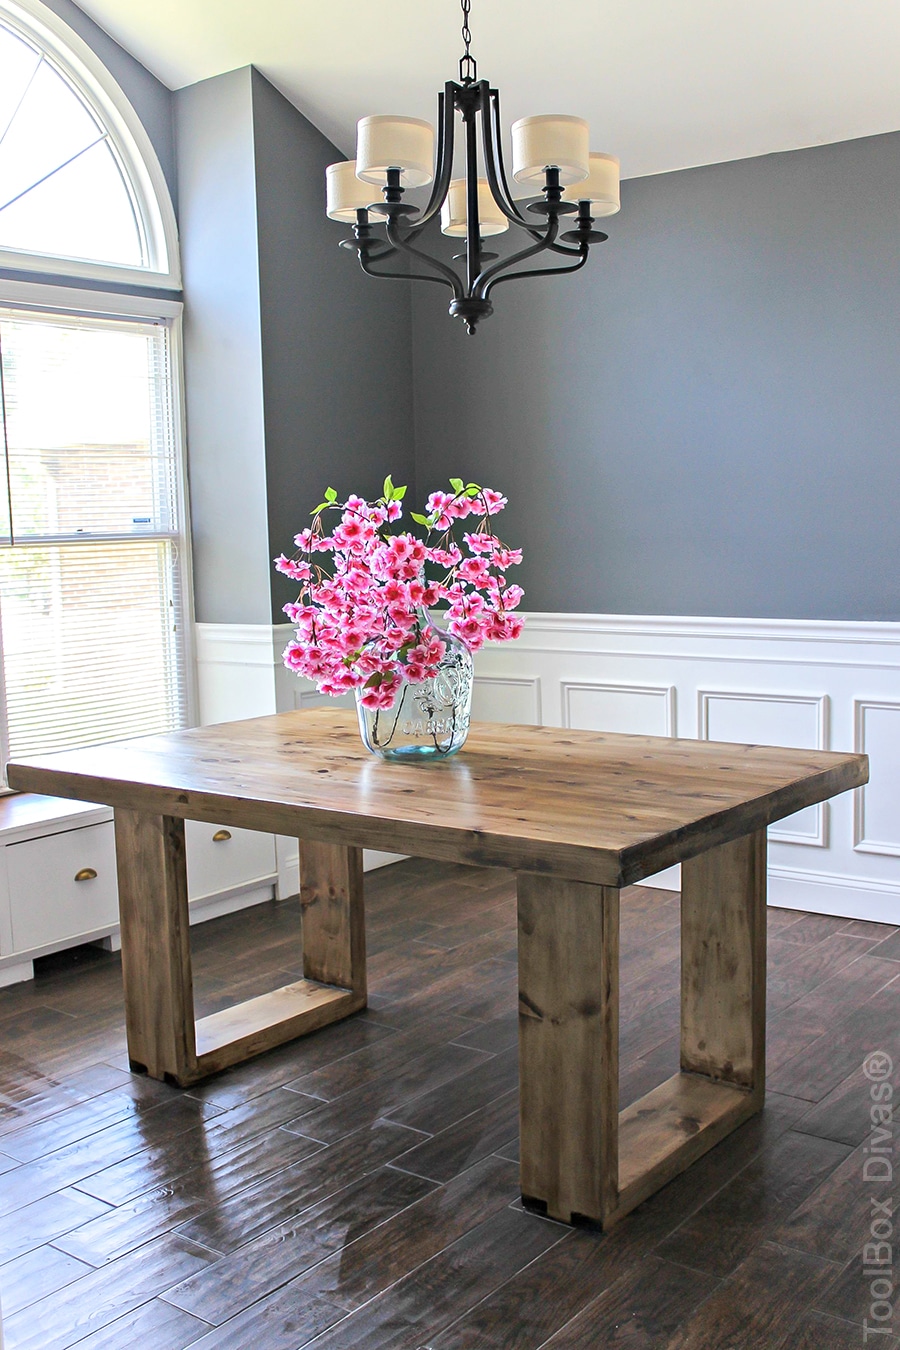 How to build a DIY husky modern dining table. Free plans by Jen Woodhouse.